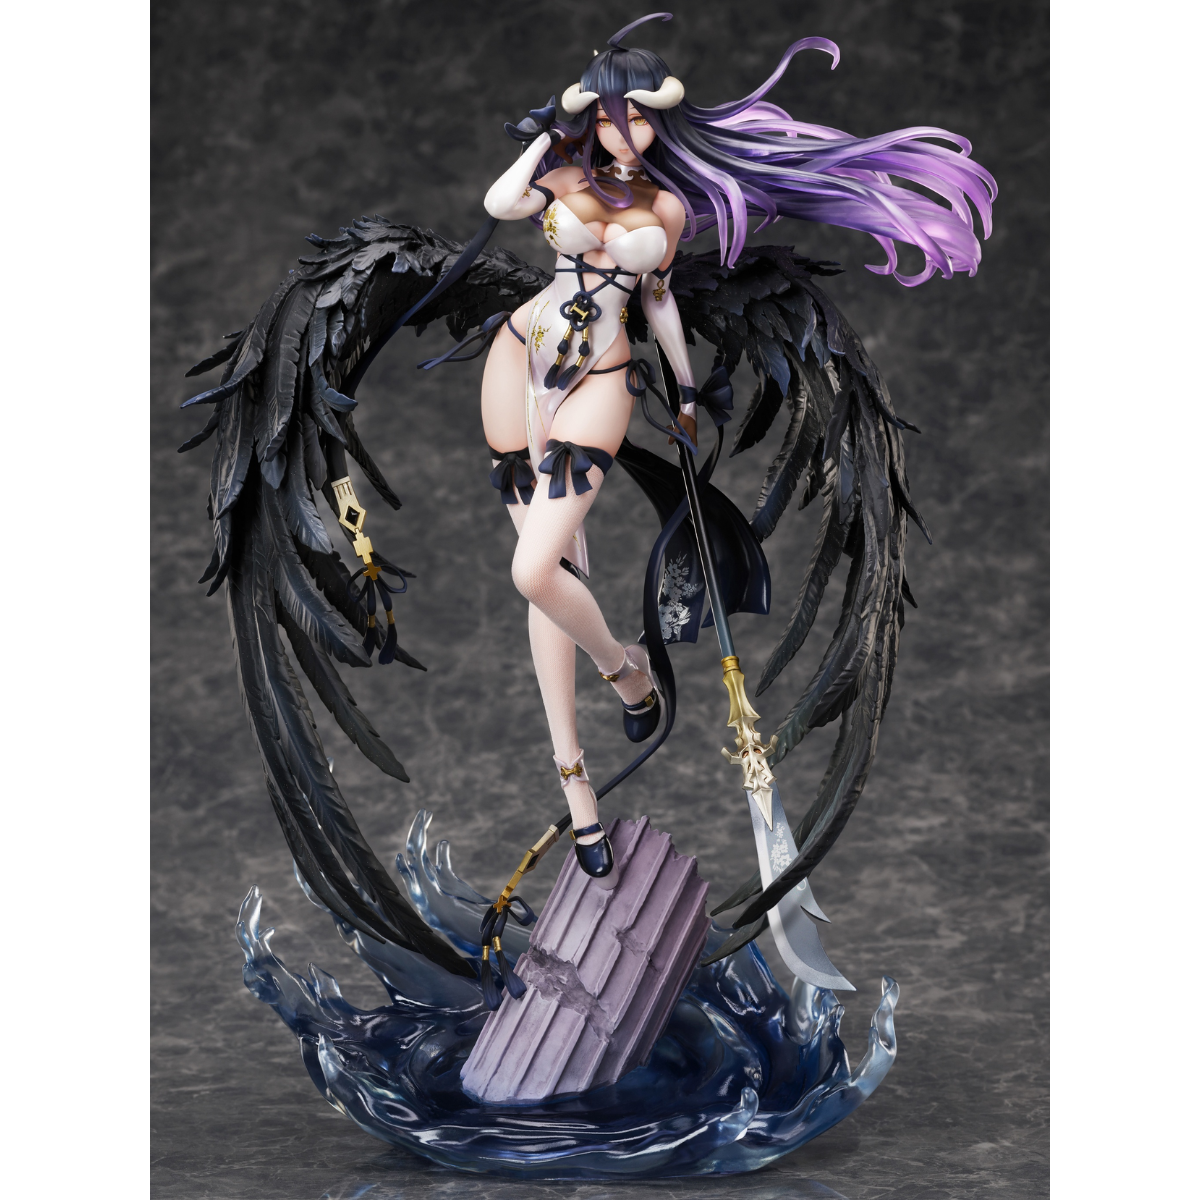 Overlord 1/7 Scale Figure "Albedo" (China Dress Ver.)-FuRyu-Ace Cards & Collectibles